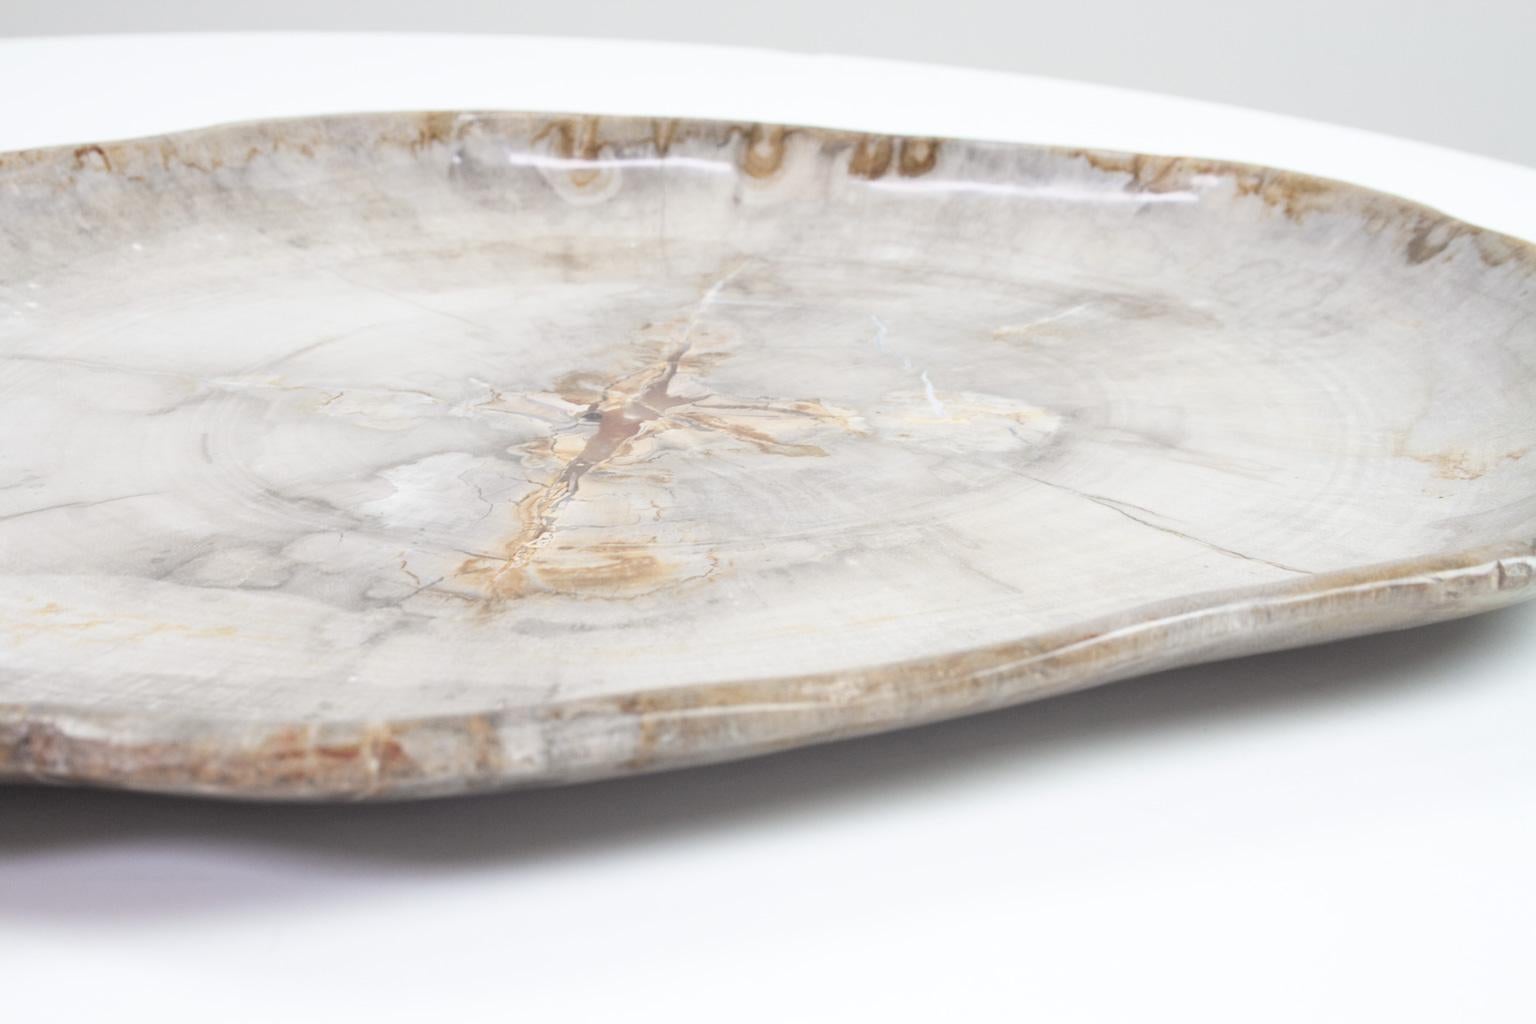 Stone Very Large Petrified Wood Plate or Platter, Home Accessory of Organic Origin